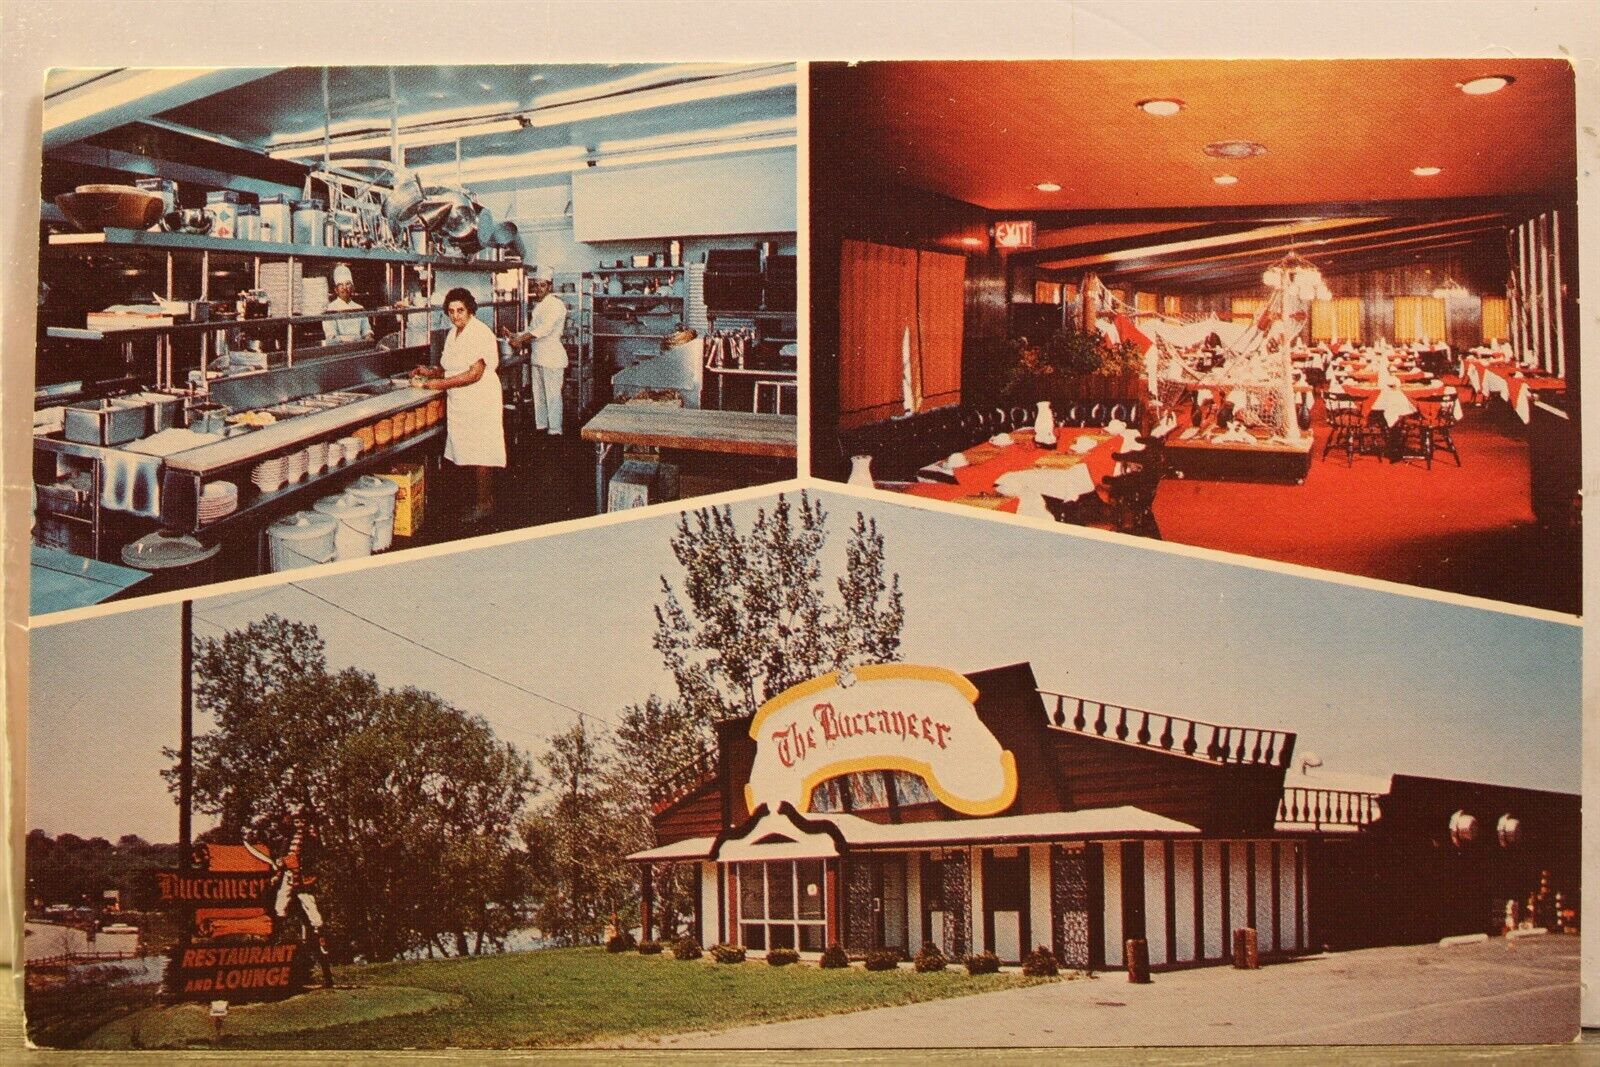 New York NY Rochester Buccaneer Restaurant Postcard Old Vintage Card View Postal